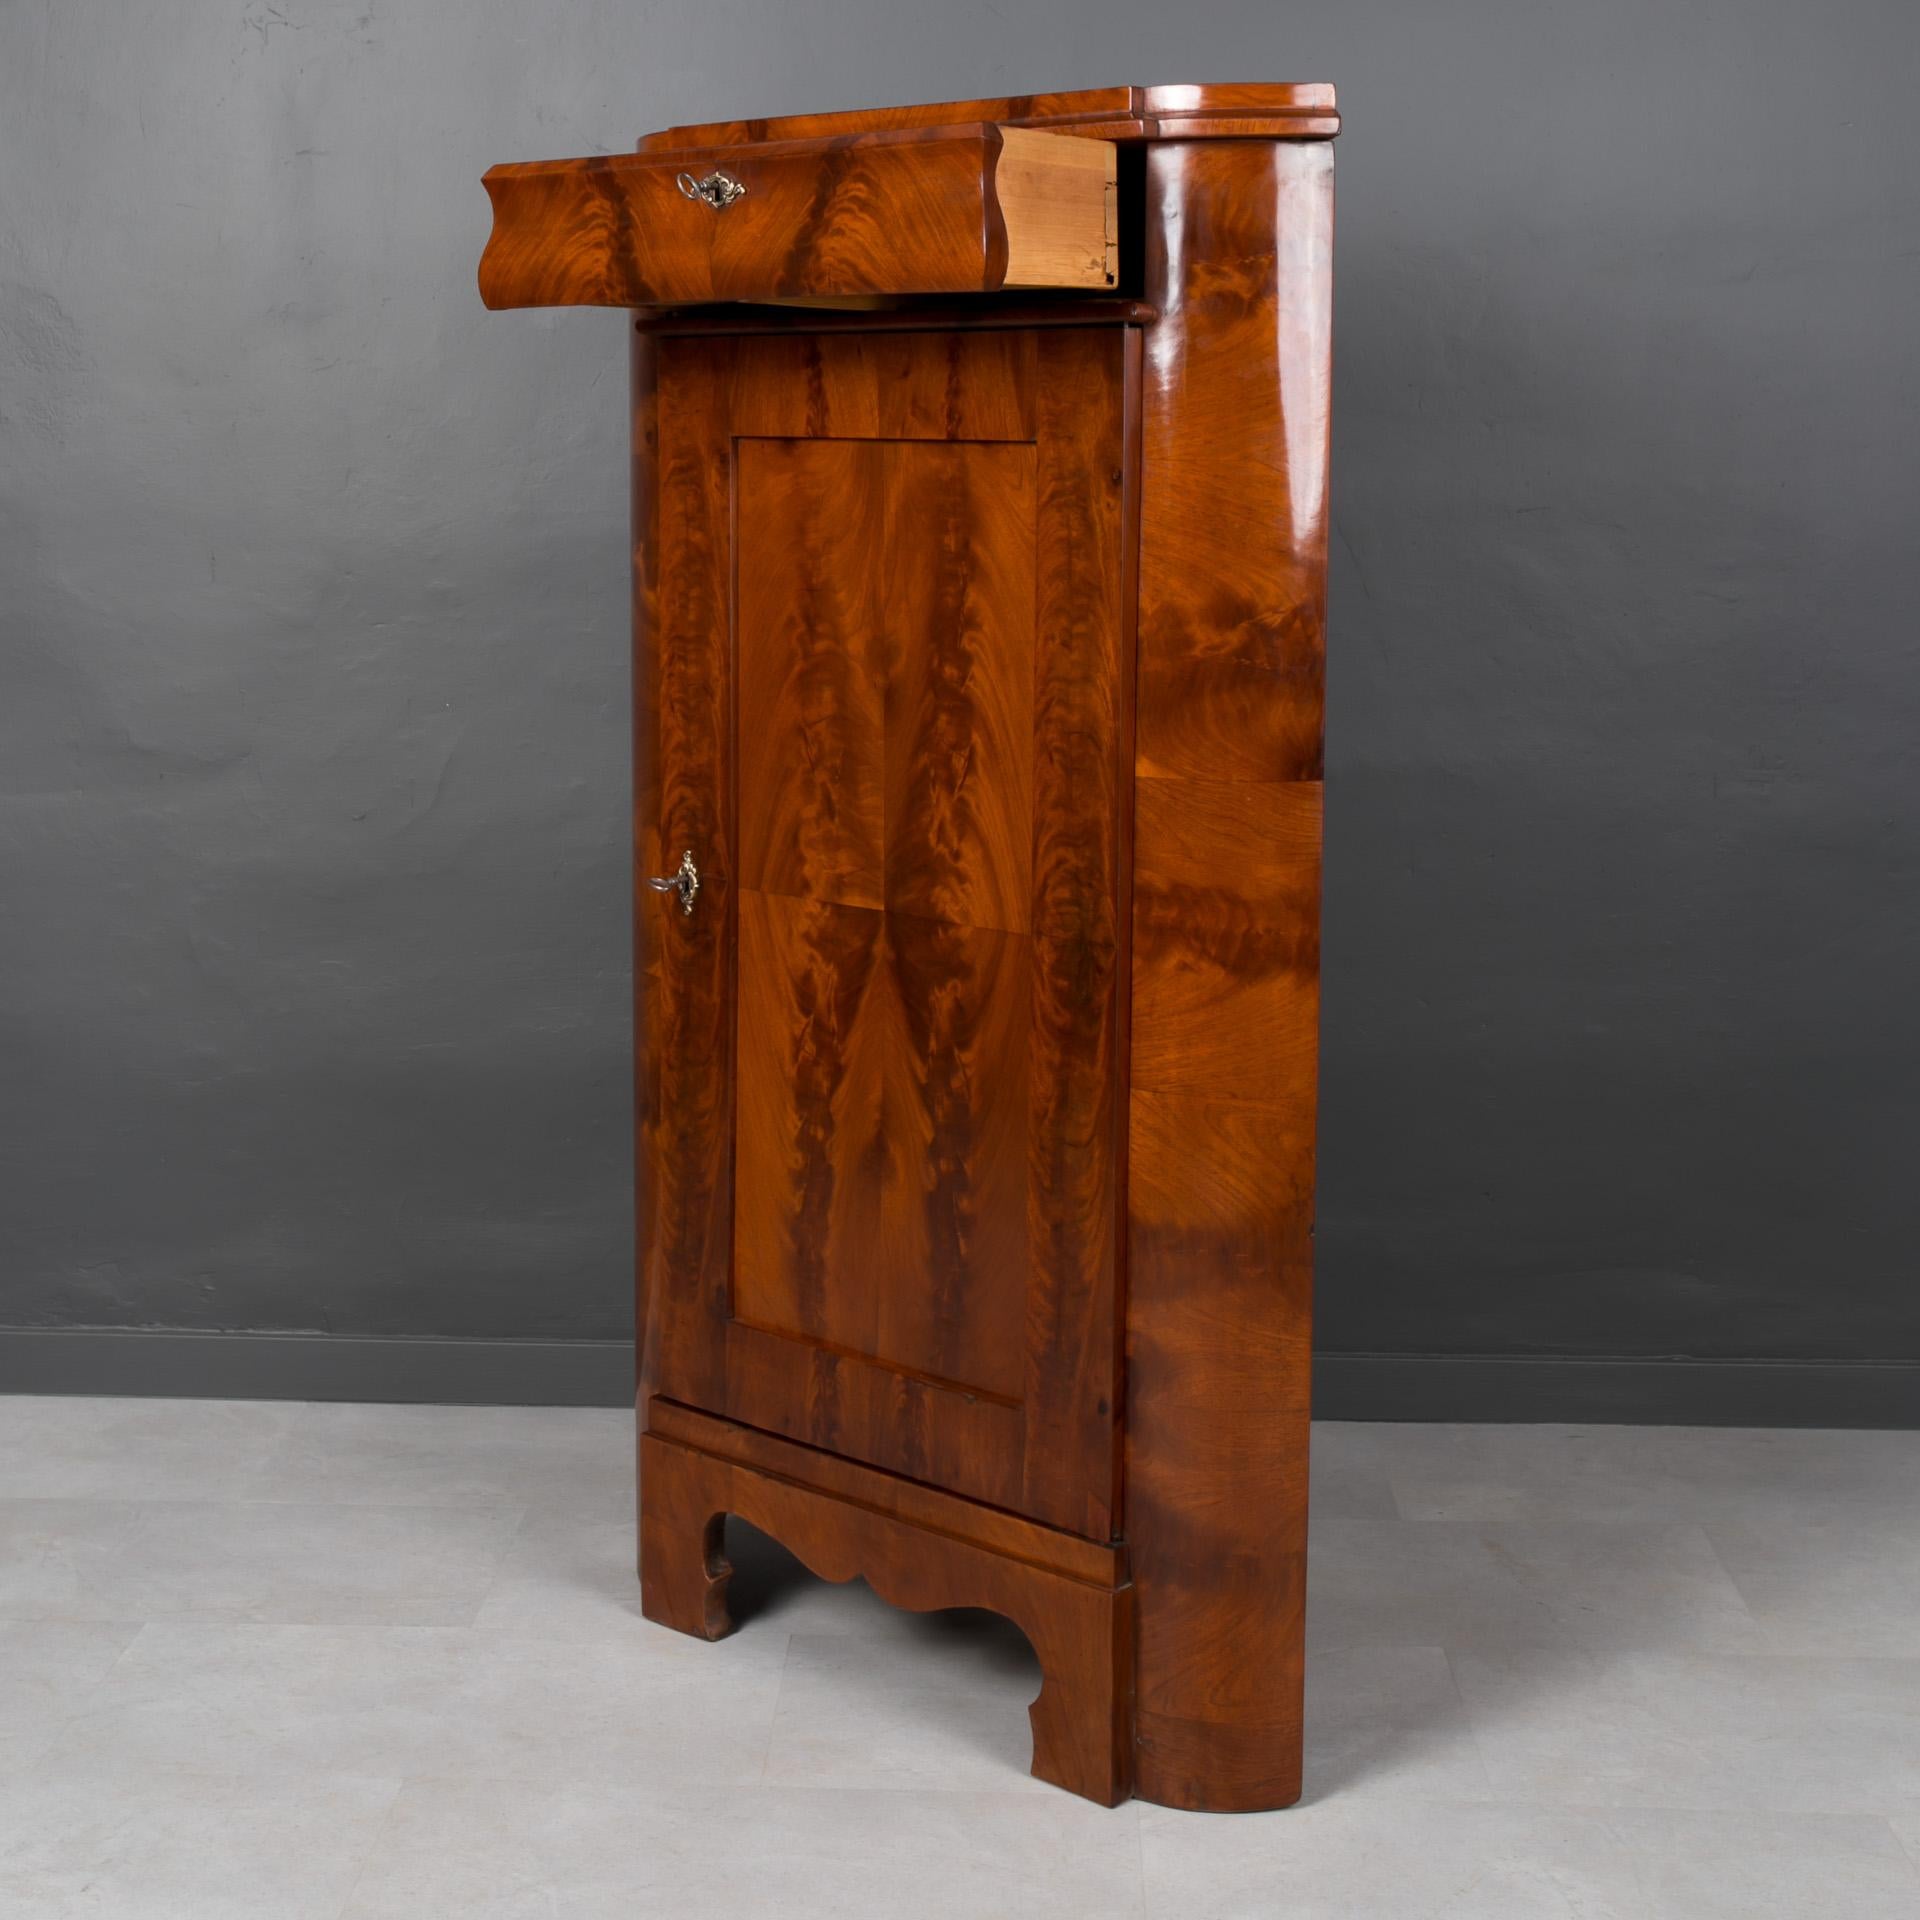 Biedermeier Corner Cabinet, 19th Century, Fully Renovated In Good Condition For Sale In Wrocław, Poland